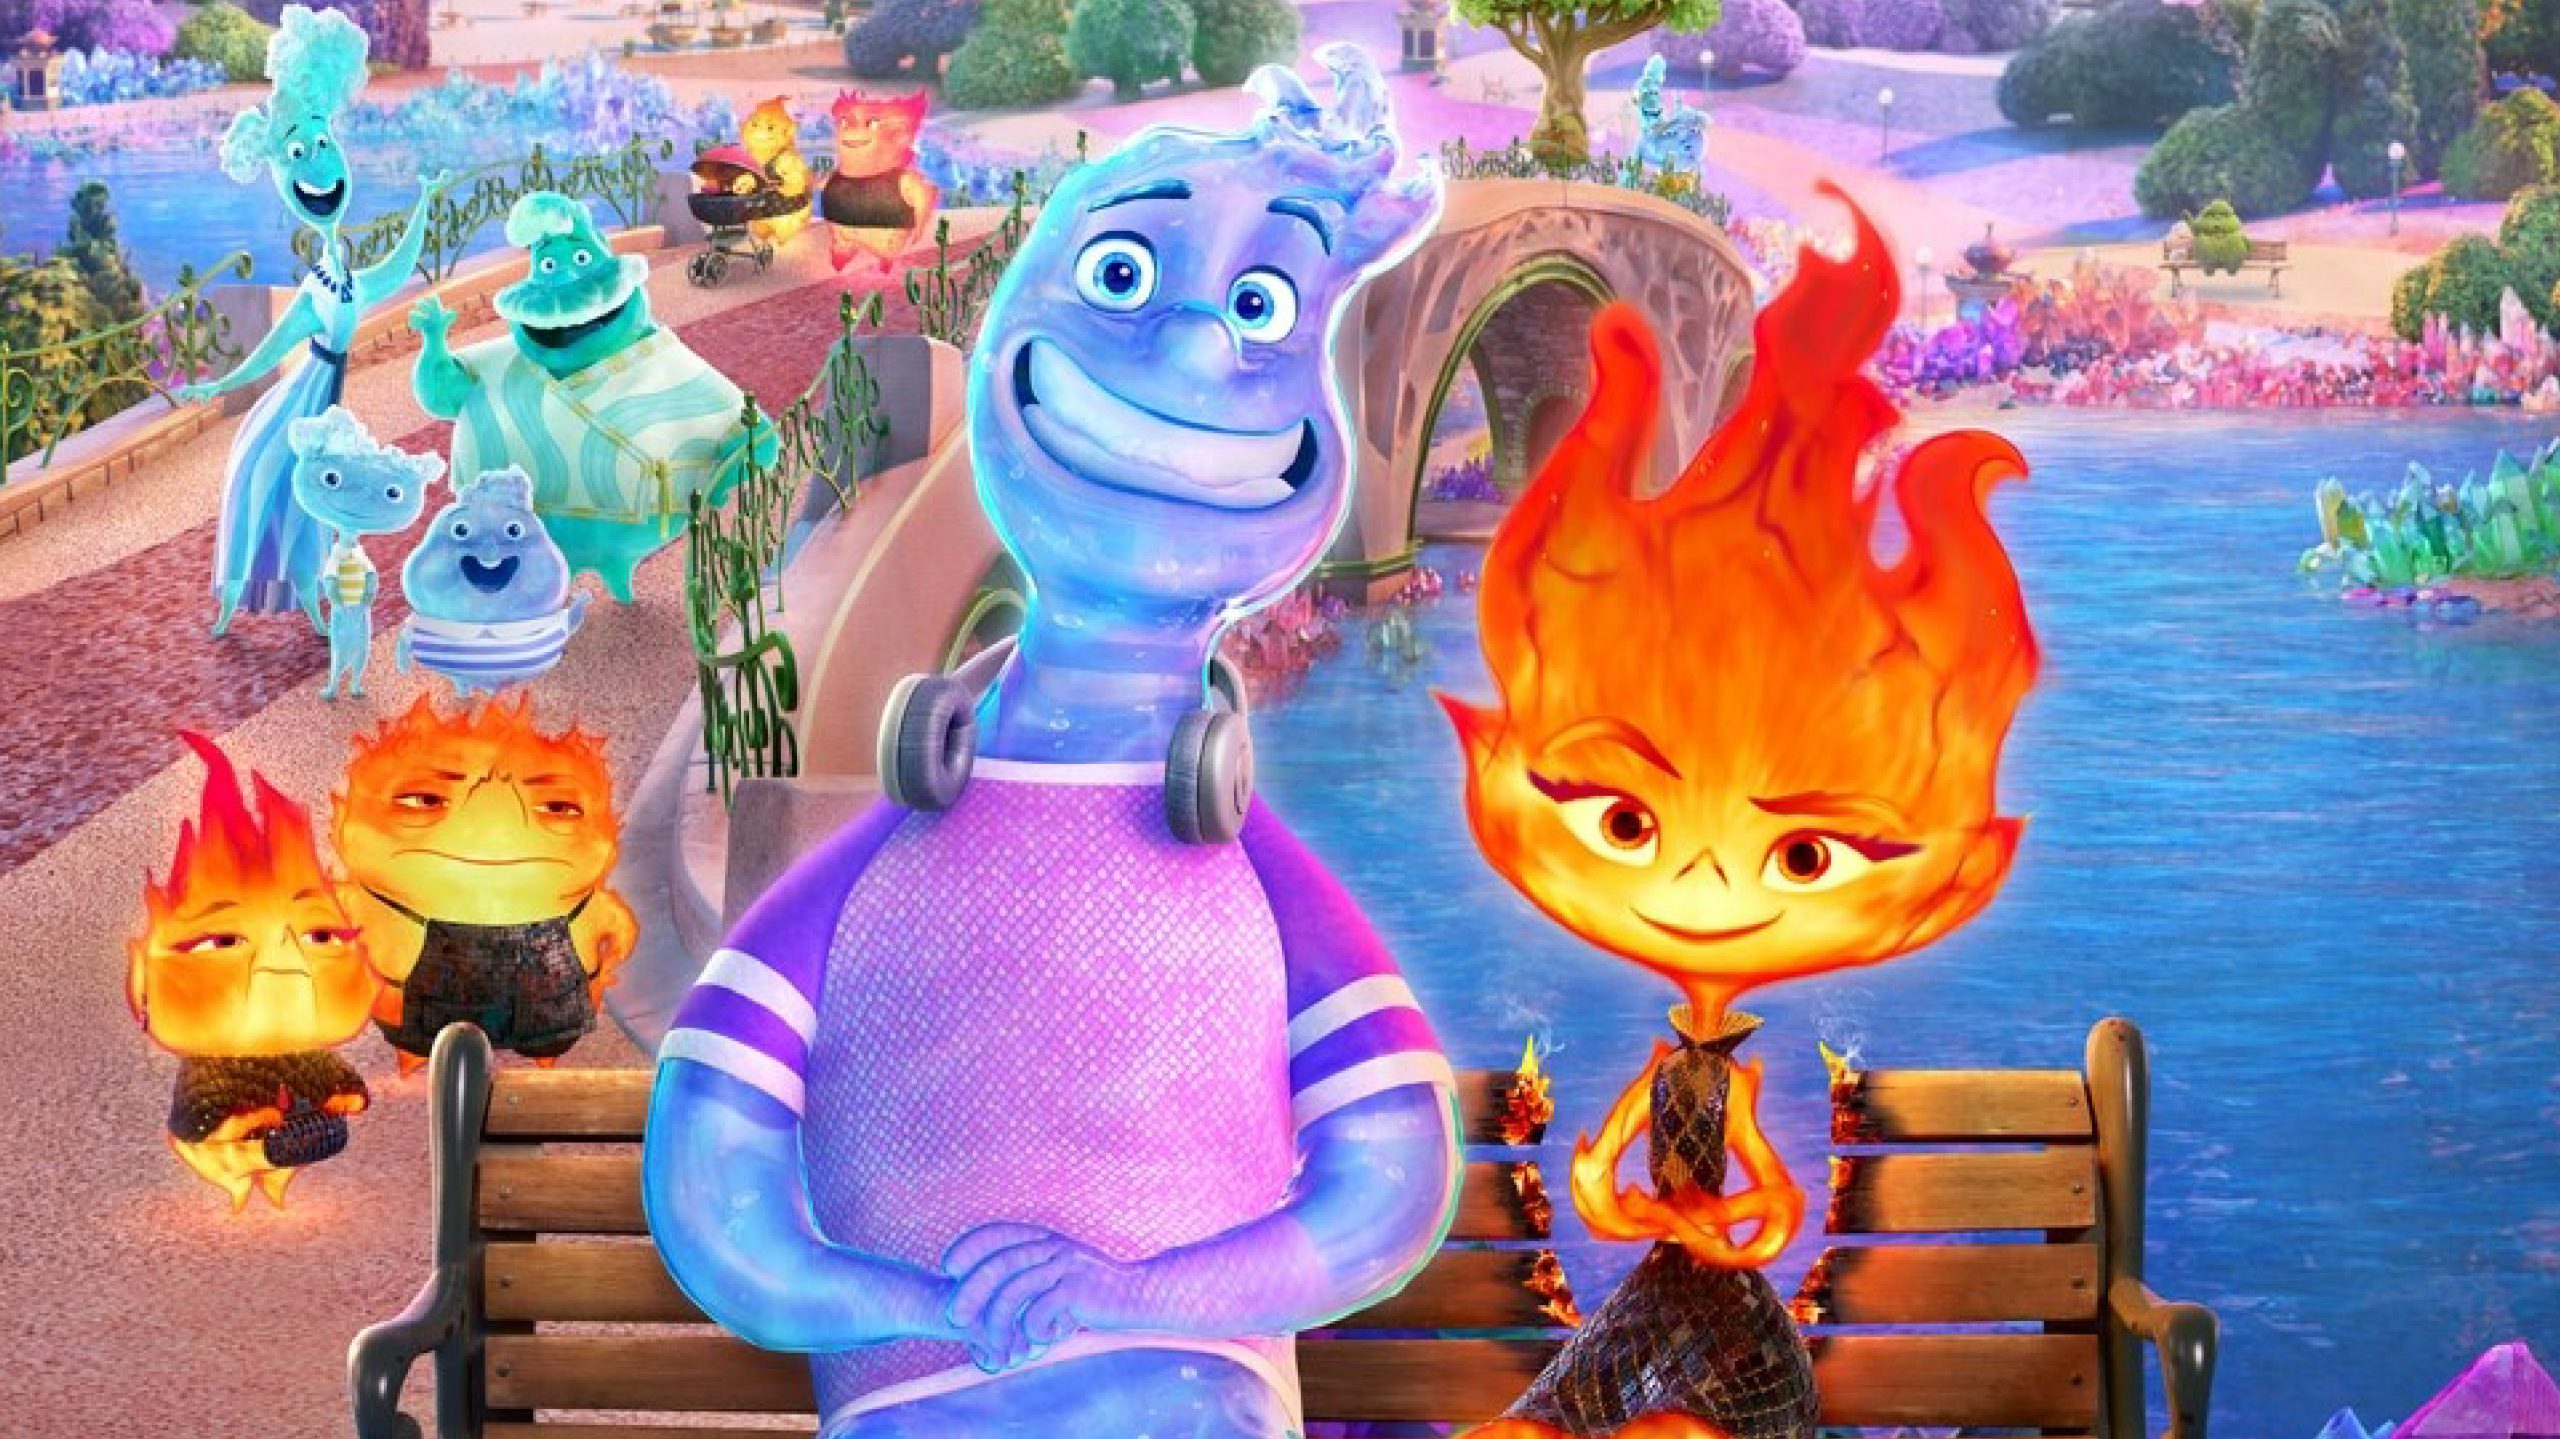 Your Children Don’t Like Science? Bring Them to Watch Disney Pixar’s Elemental and They Will Have a Change of Heart.